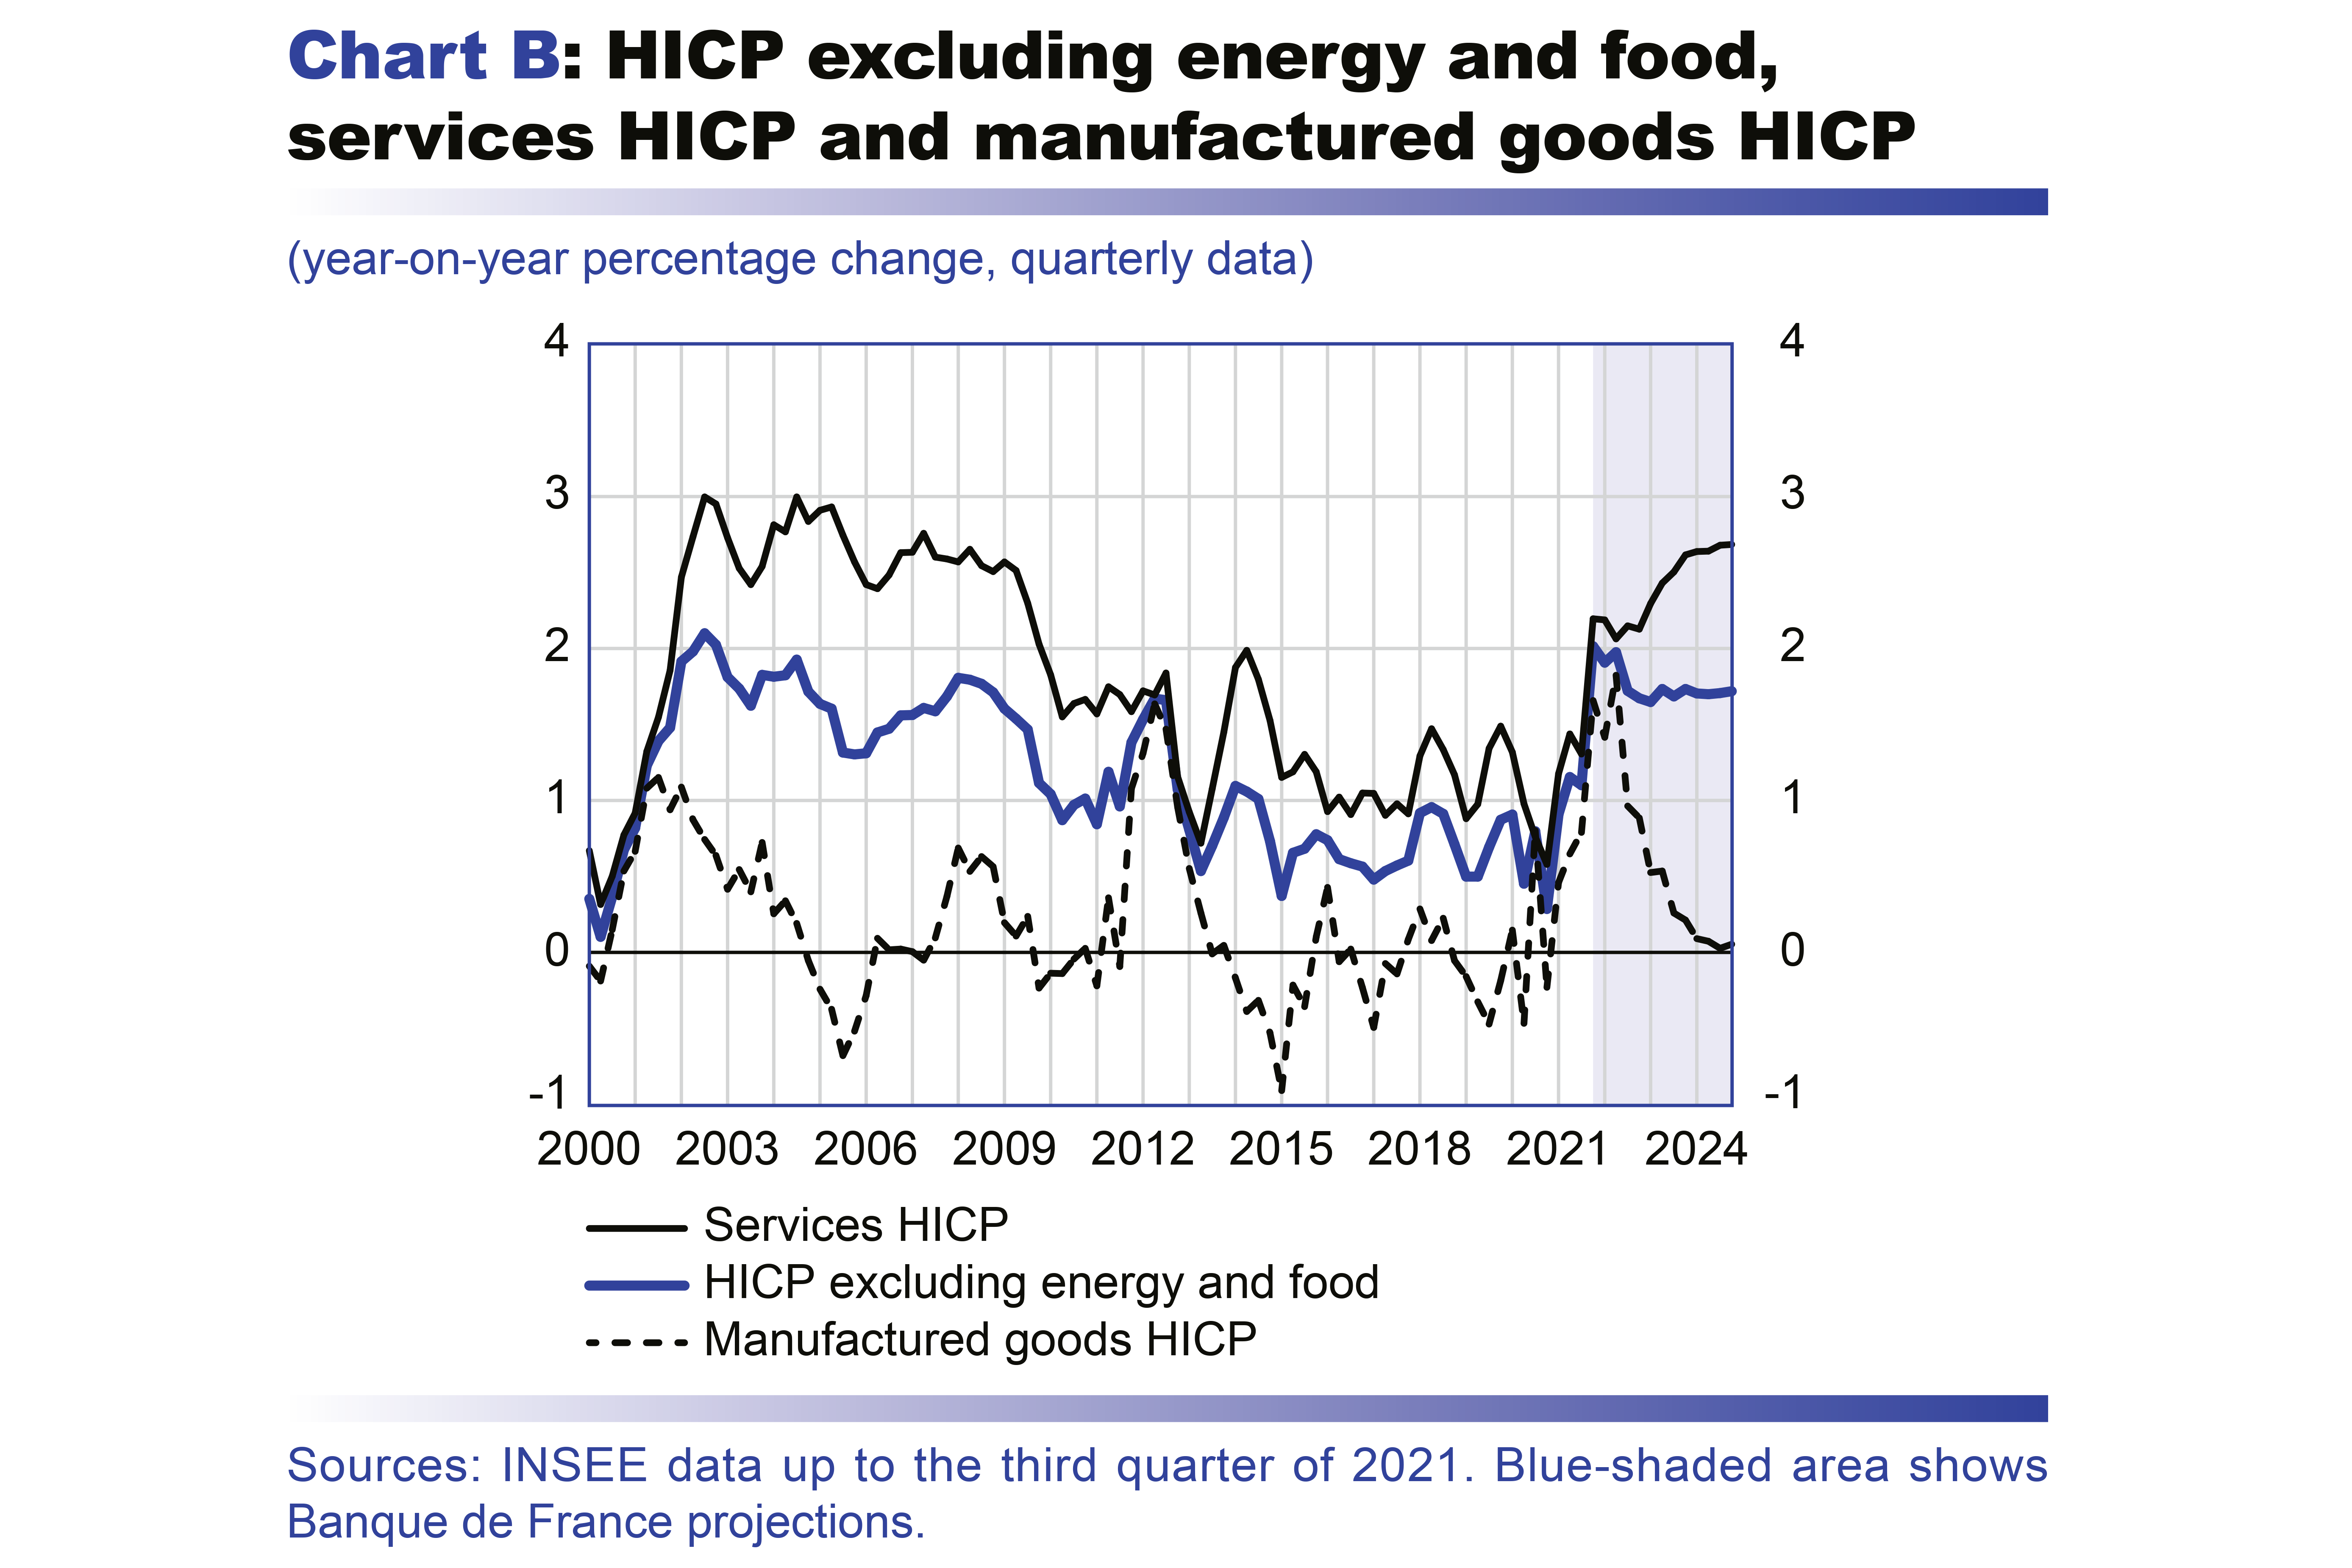 Macroeconomic projections – December 2021 - HICP excluding energy and food, services HICP and manufactured goods HICP